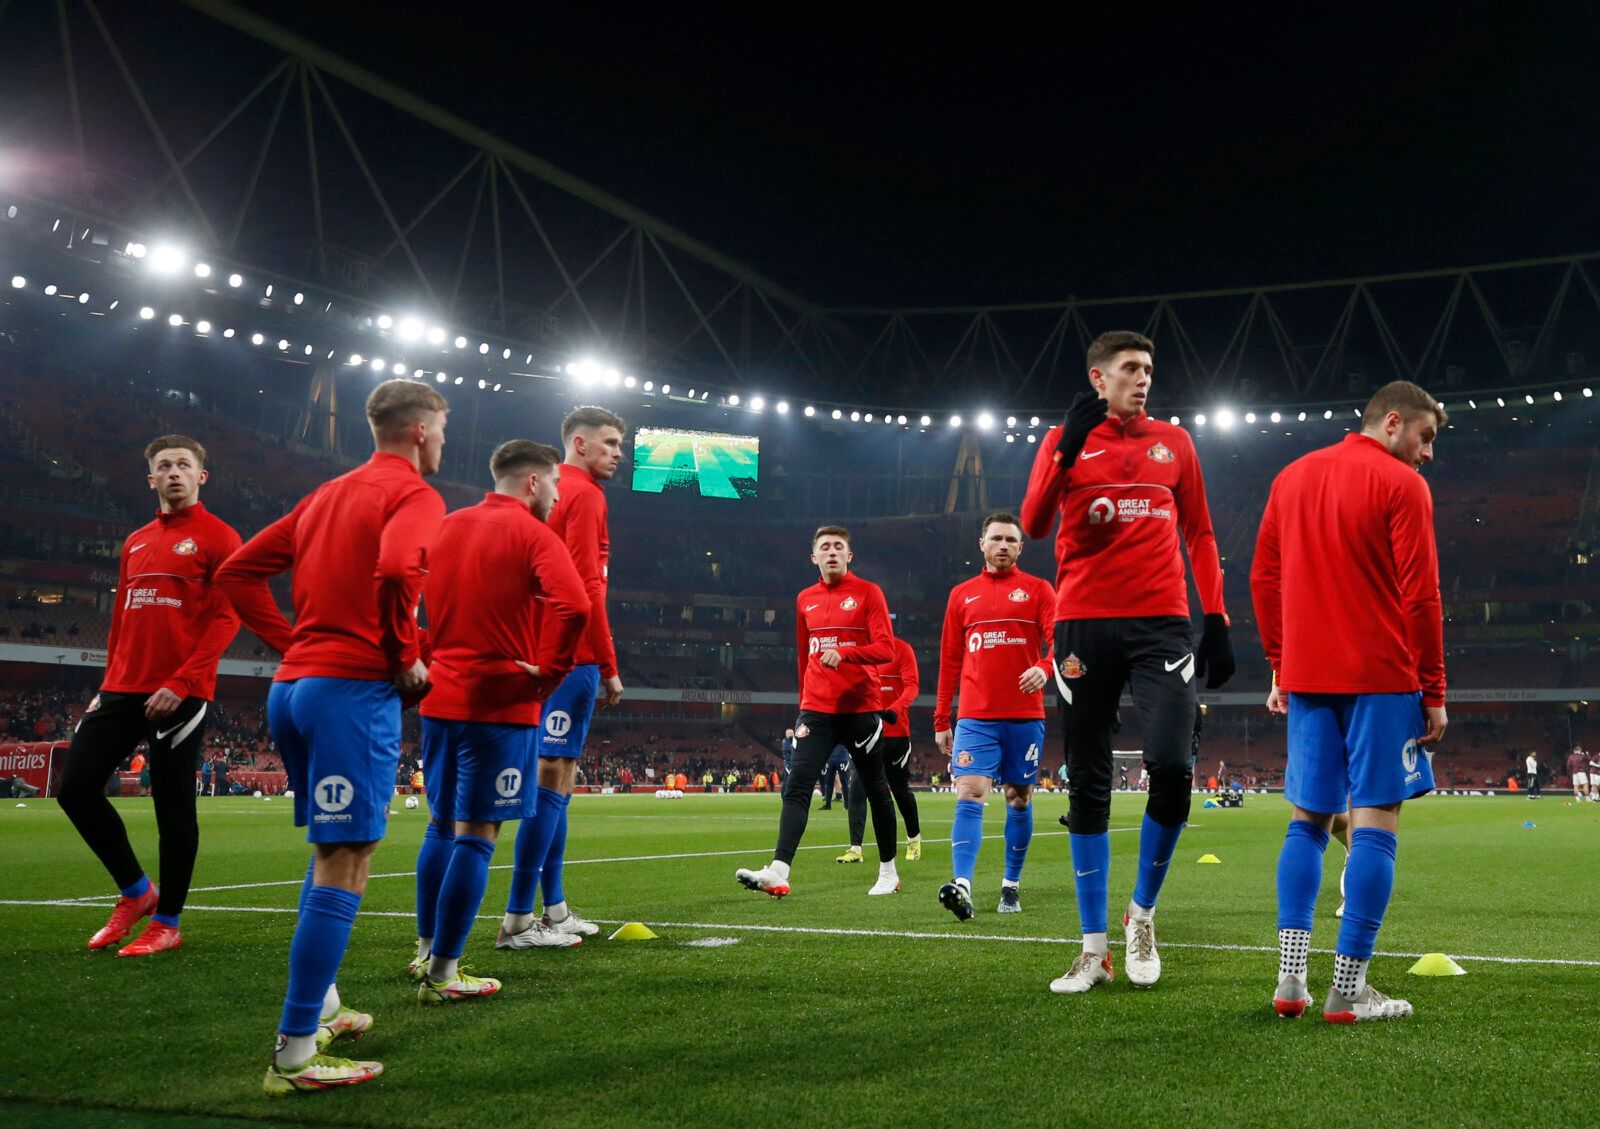 Soccer Football - Carabao Cup - Quarter Final - Arsenal v Sunderland - Emirates Stadium, London, Britain - December 21, 2021 Sunderland's Ross Stewart with teammates during the warm up before the match Action Images via Reuters/Lee Smith EDITORIAL USE ONLY. No use with unauthorized audio, video, data, fixture lists, club/league logos or 'live' services. Online in-match use limited to 75 images, no video emulation. No use in betting, games or single club /league/player publications.  Please conta